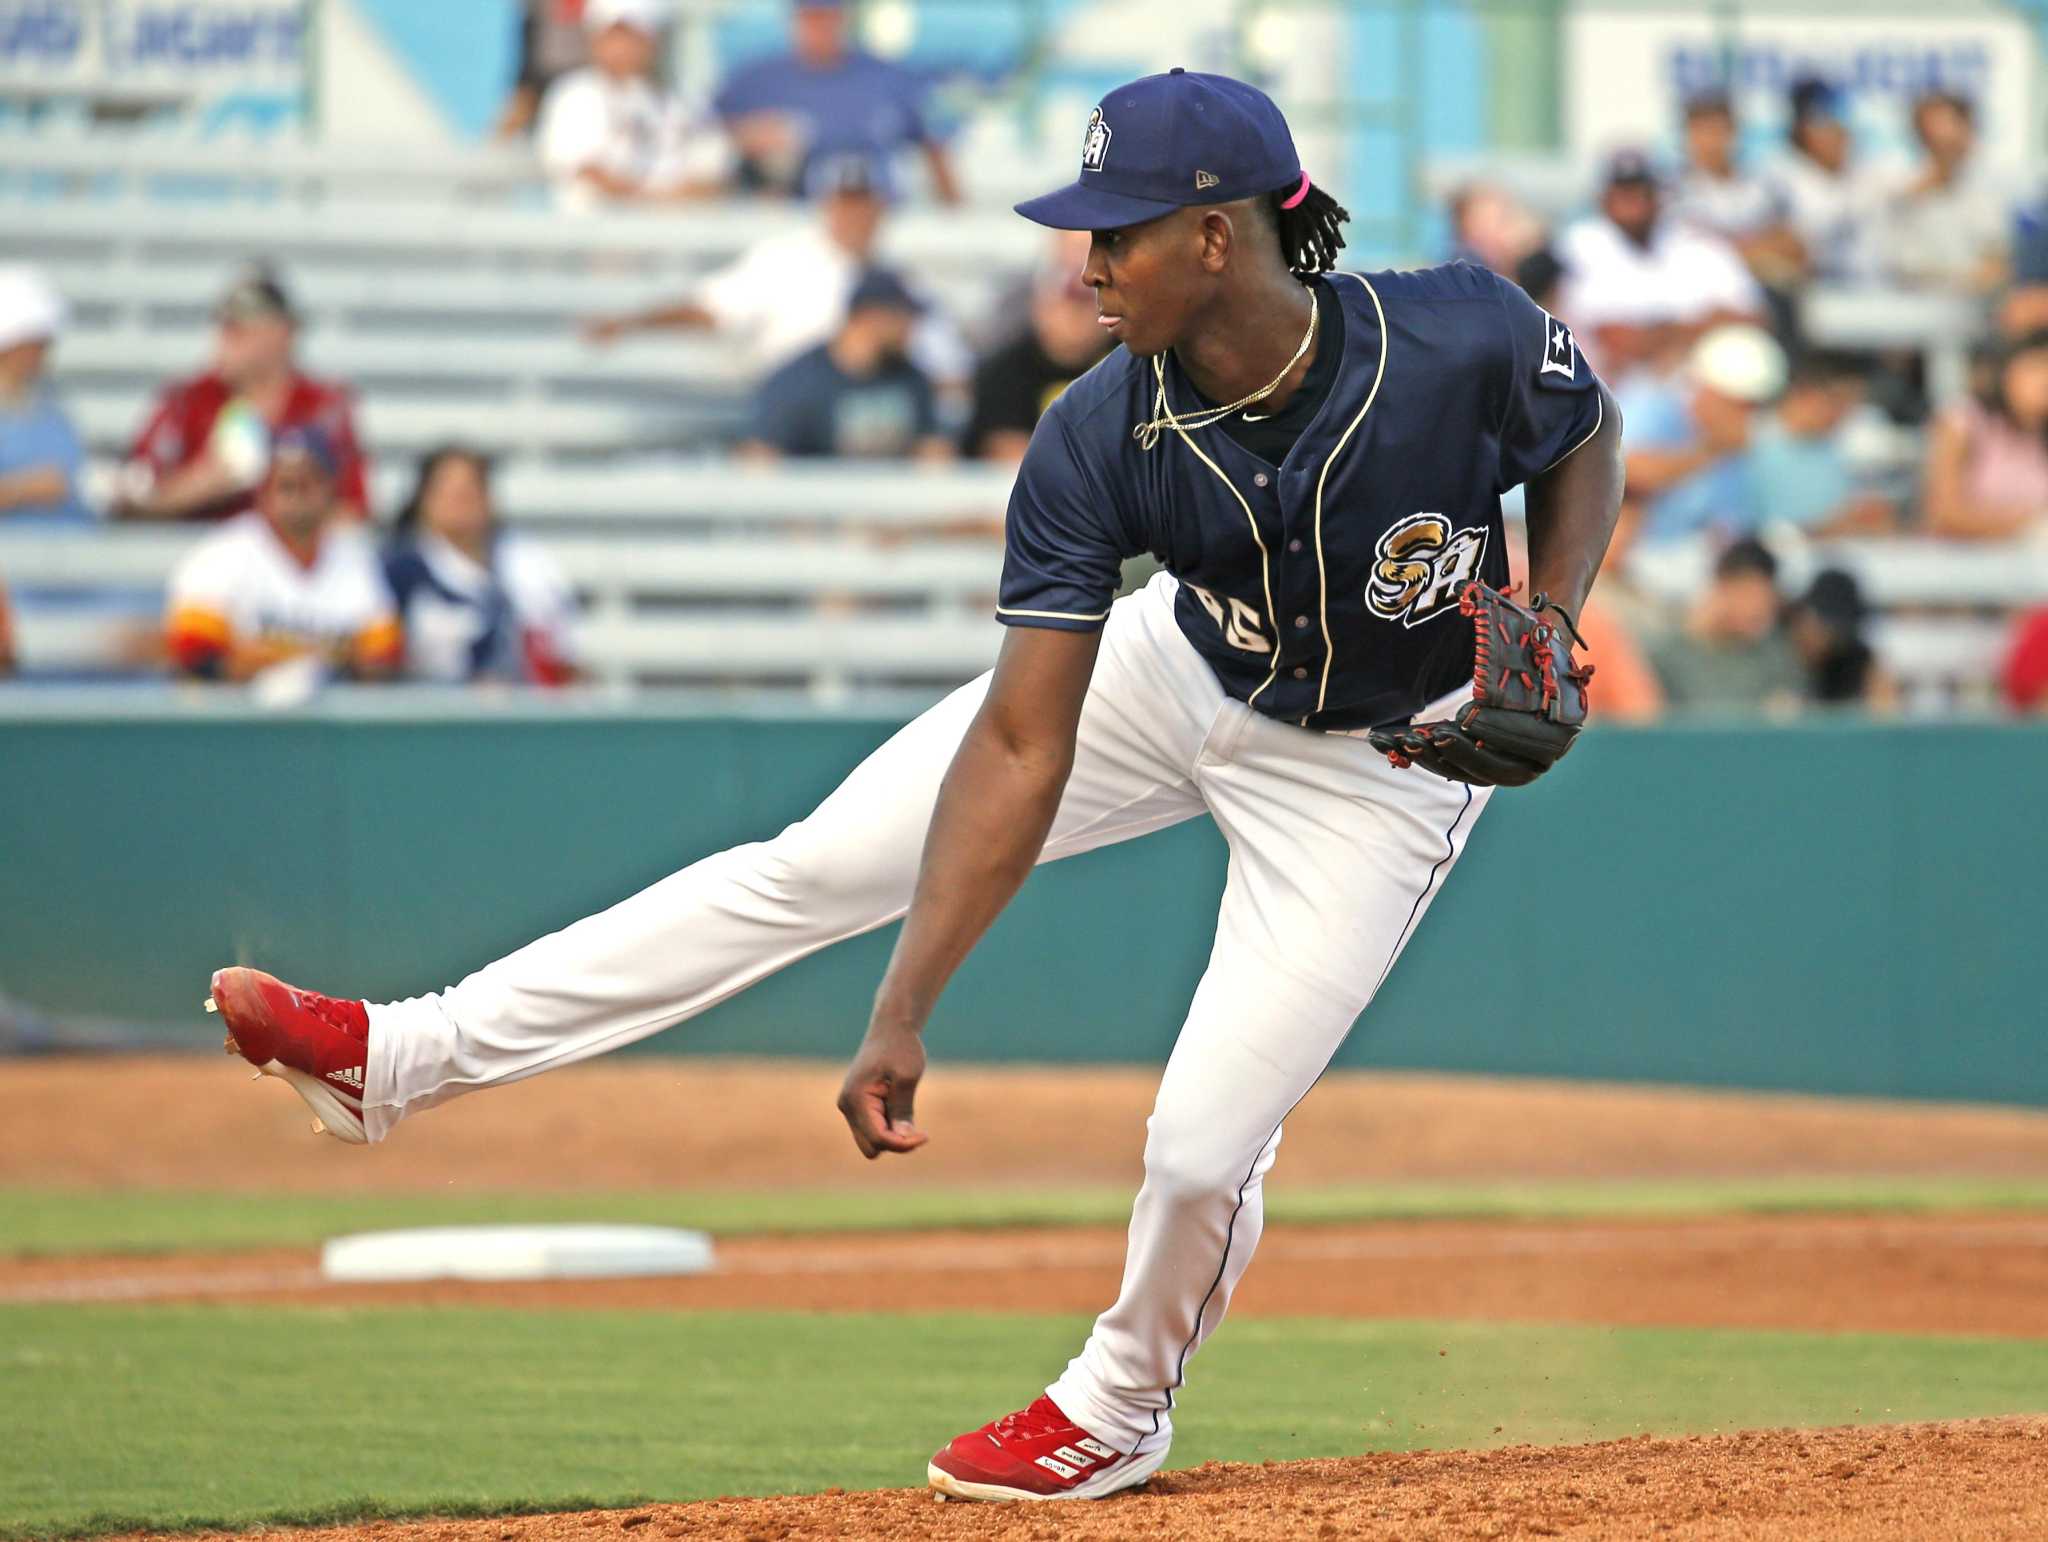 San Antonio Missions’ jumbled starting pitching rotation continues to